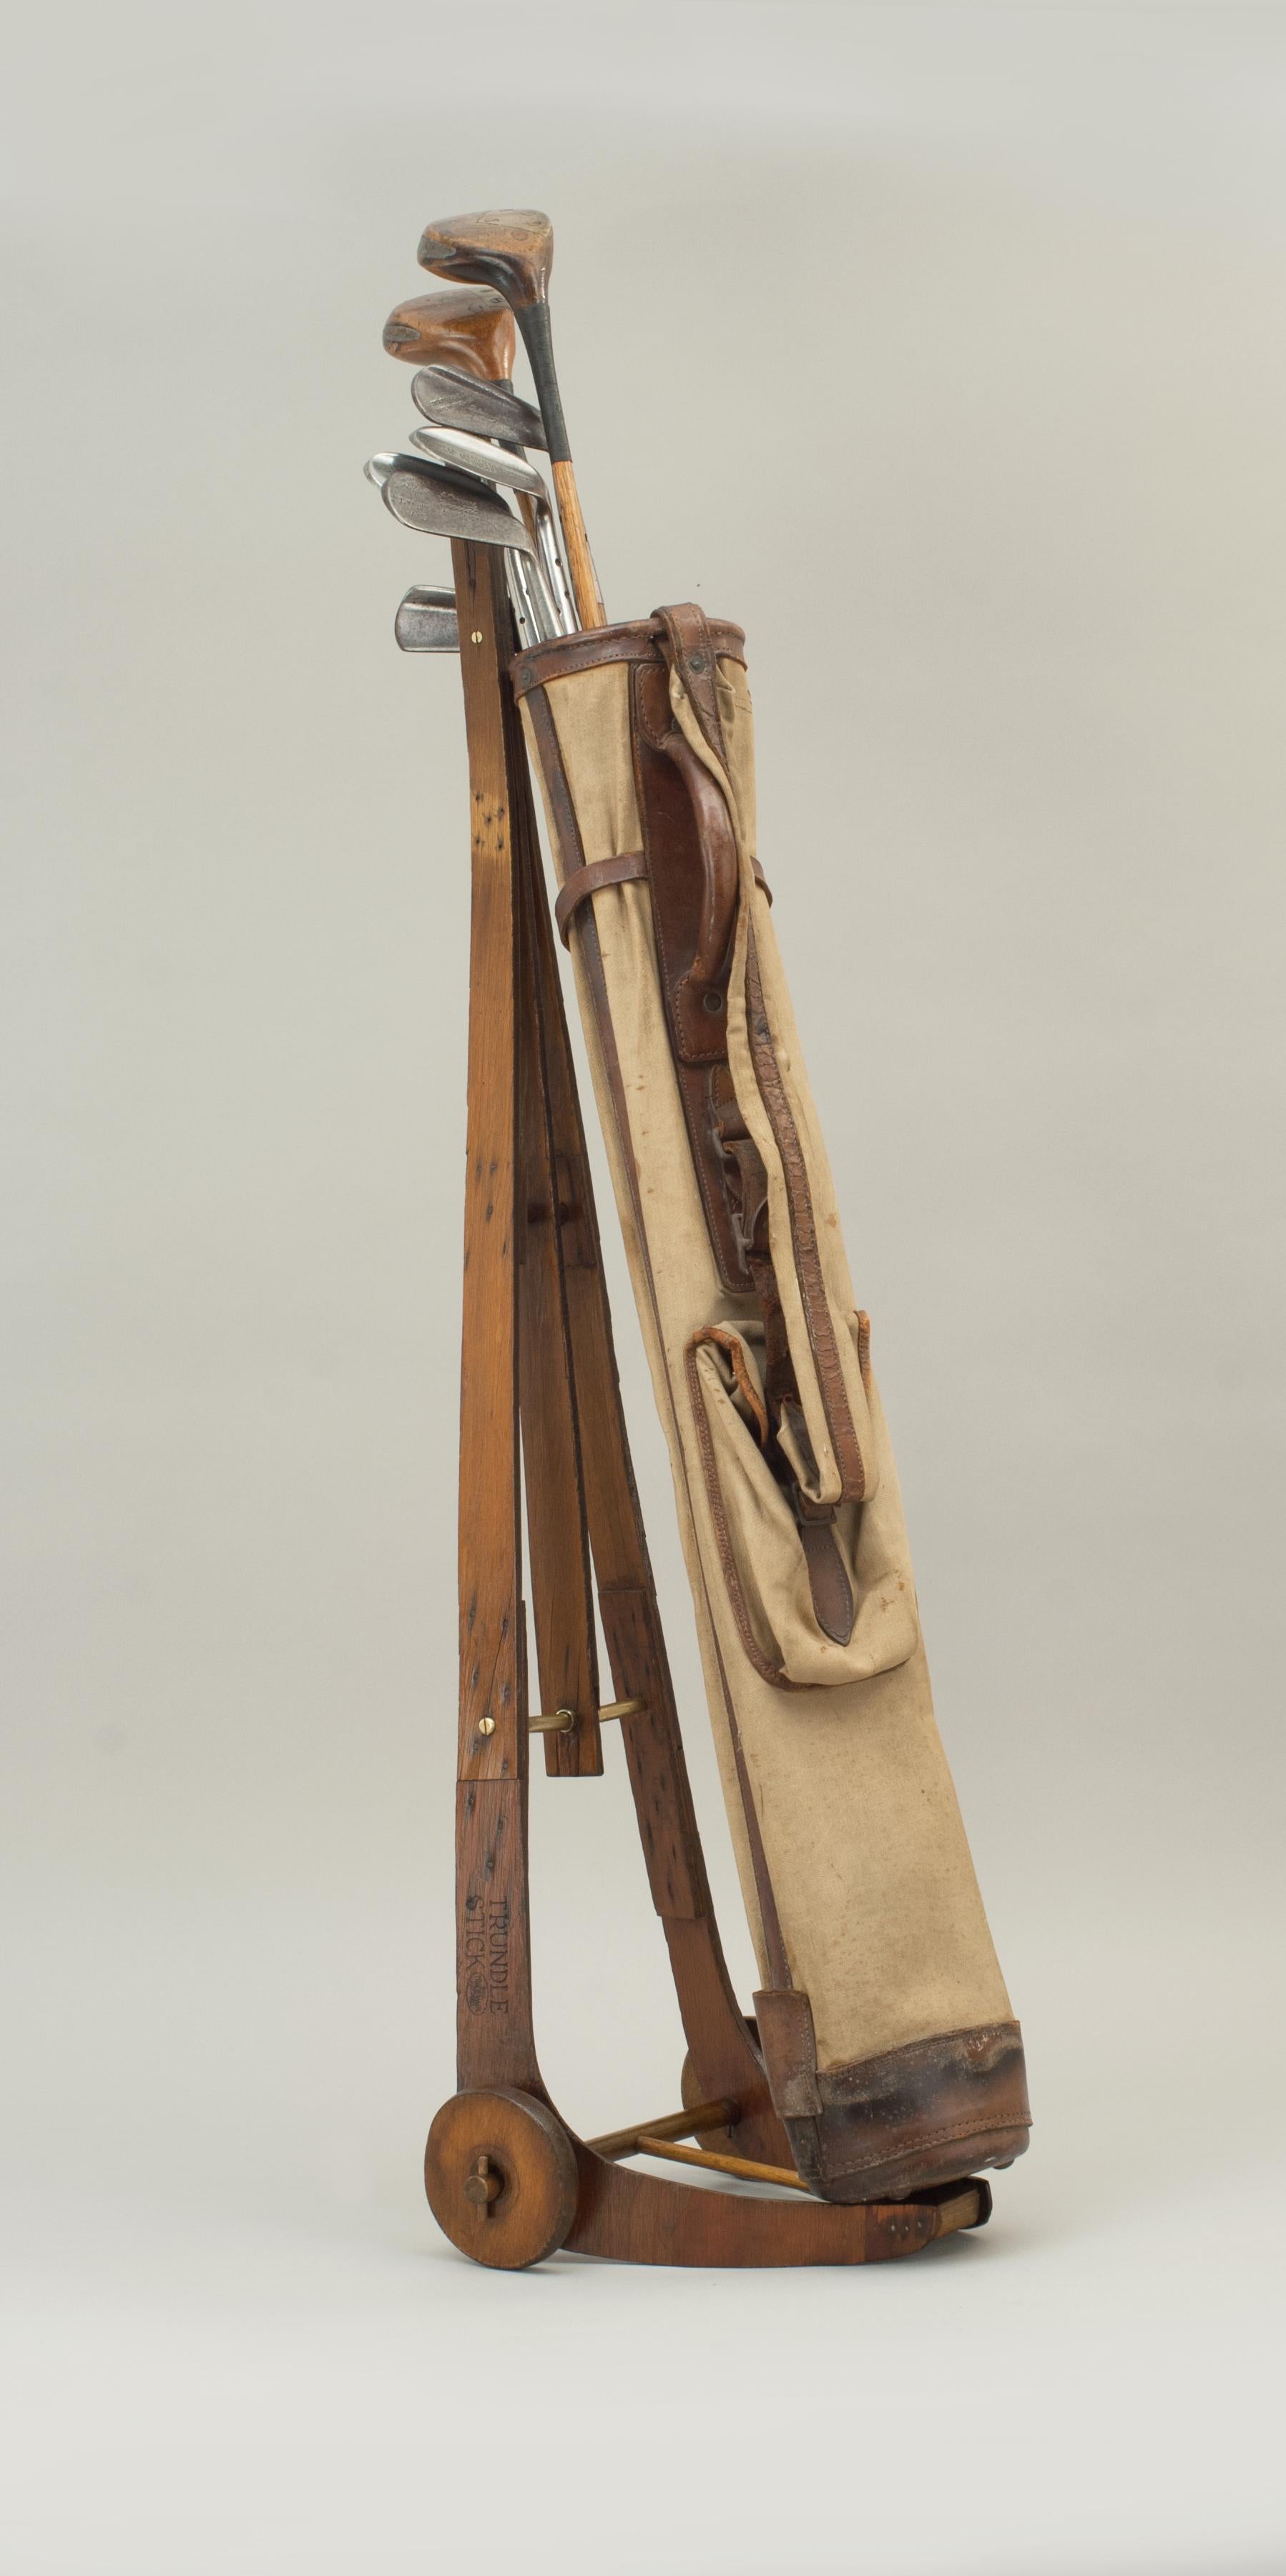 Sporting Art Unusual Wooden Trolley, Golf Club Carrier, Caddy Stand for Golf Bag, Antique